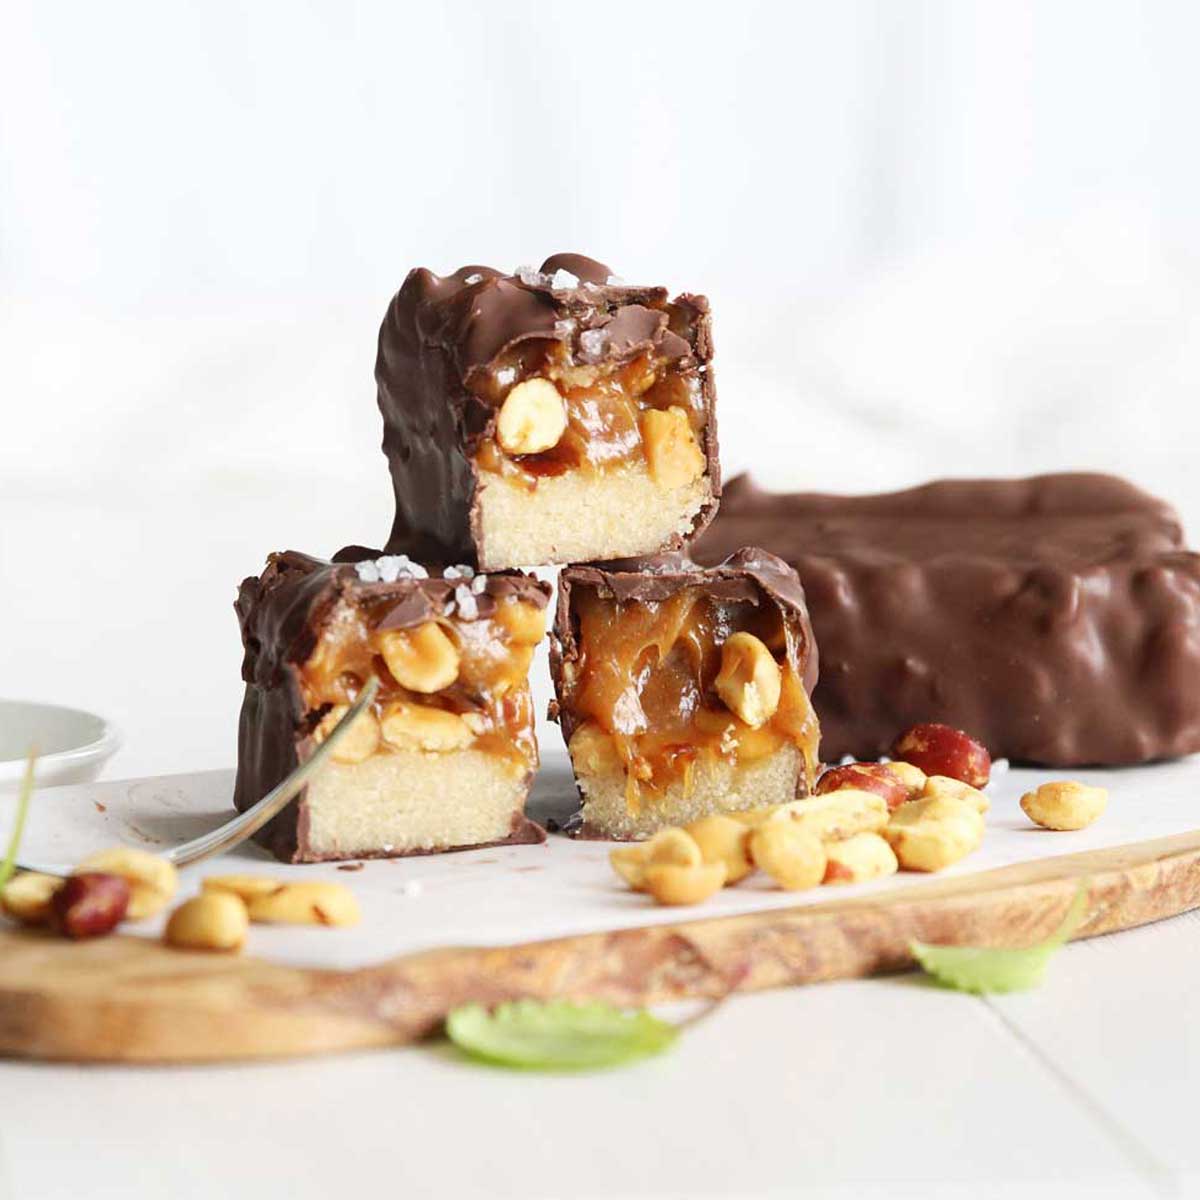 Guilt-Free Keto Snickers Protein Bars made with Collagen Peptides Powder - Pecan Pie Bars